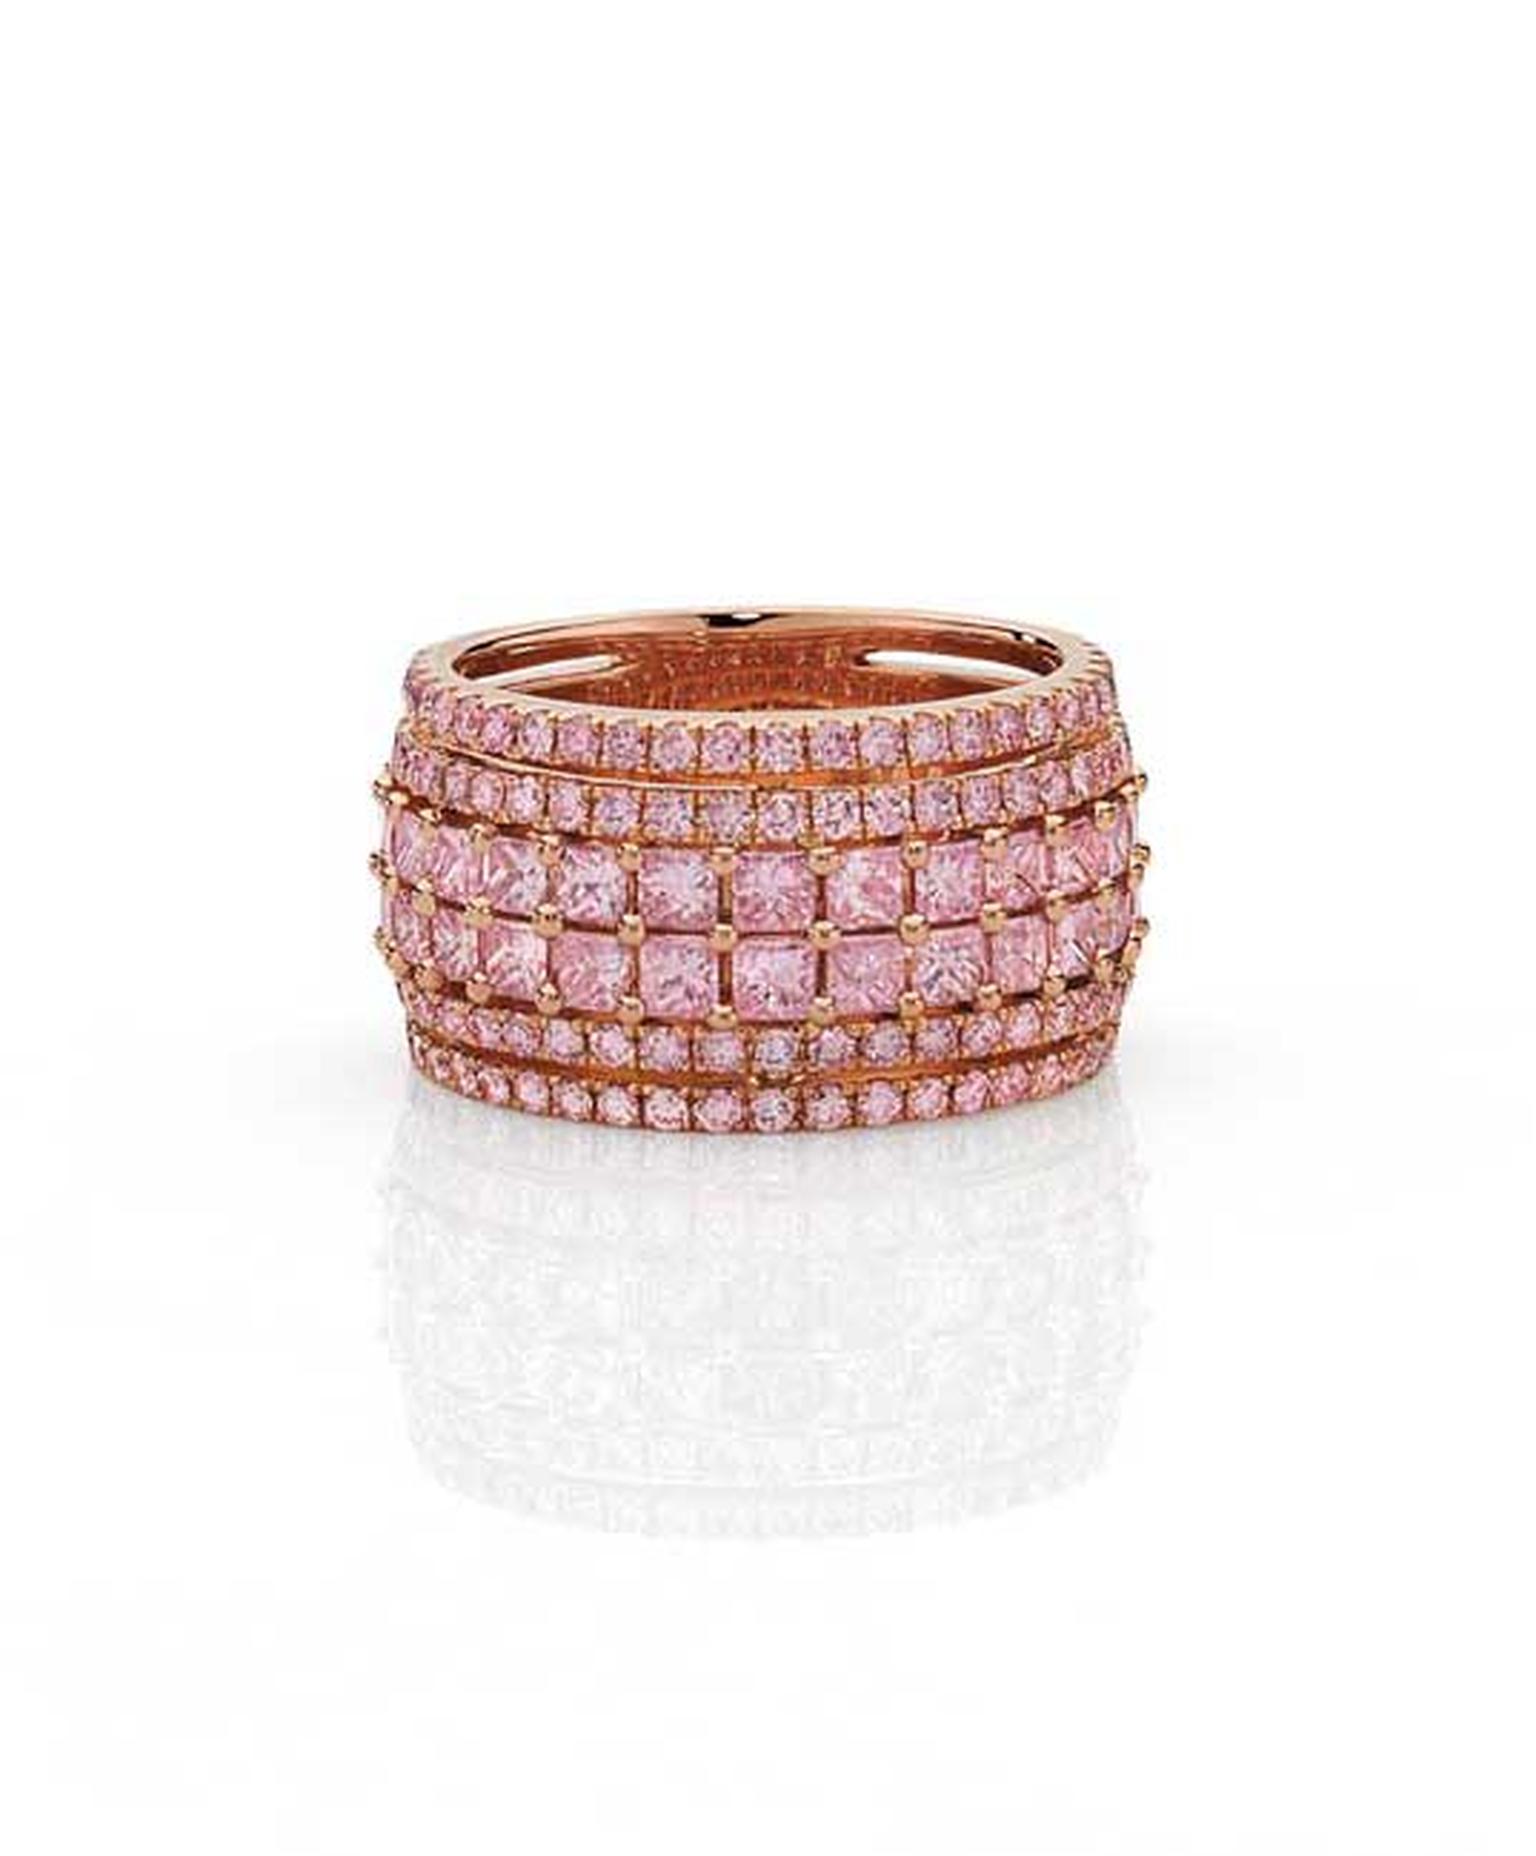 Cerrone pink diamond ring in rose gold, set with princess cut and round brilliant Argyle pink diamonds, available at www.cerrone.com.au.